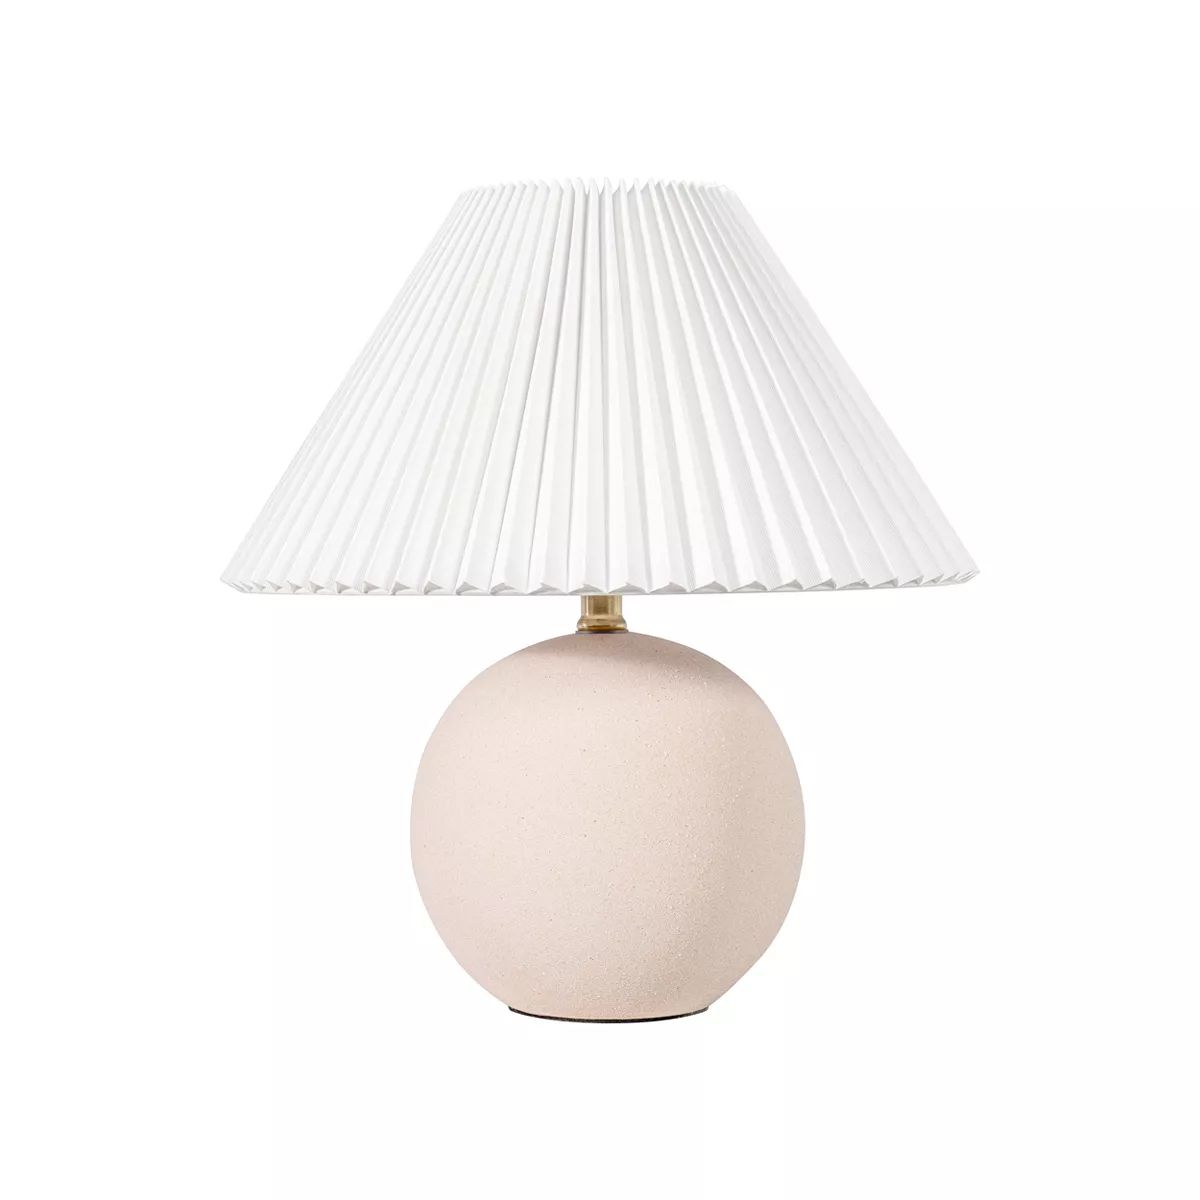 nuLOOM 17-inch Transitional Ceramic Table Lamp | Target